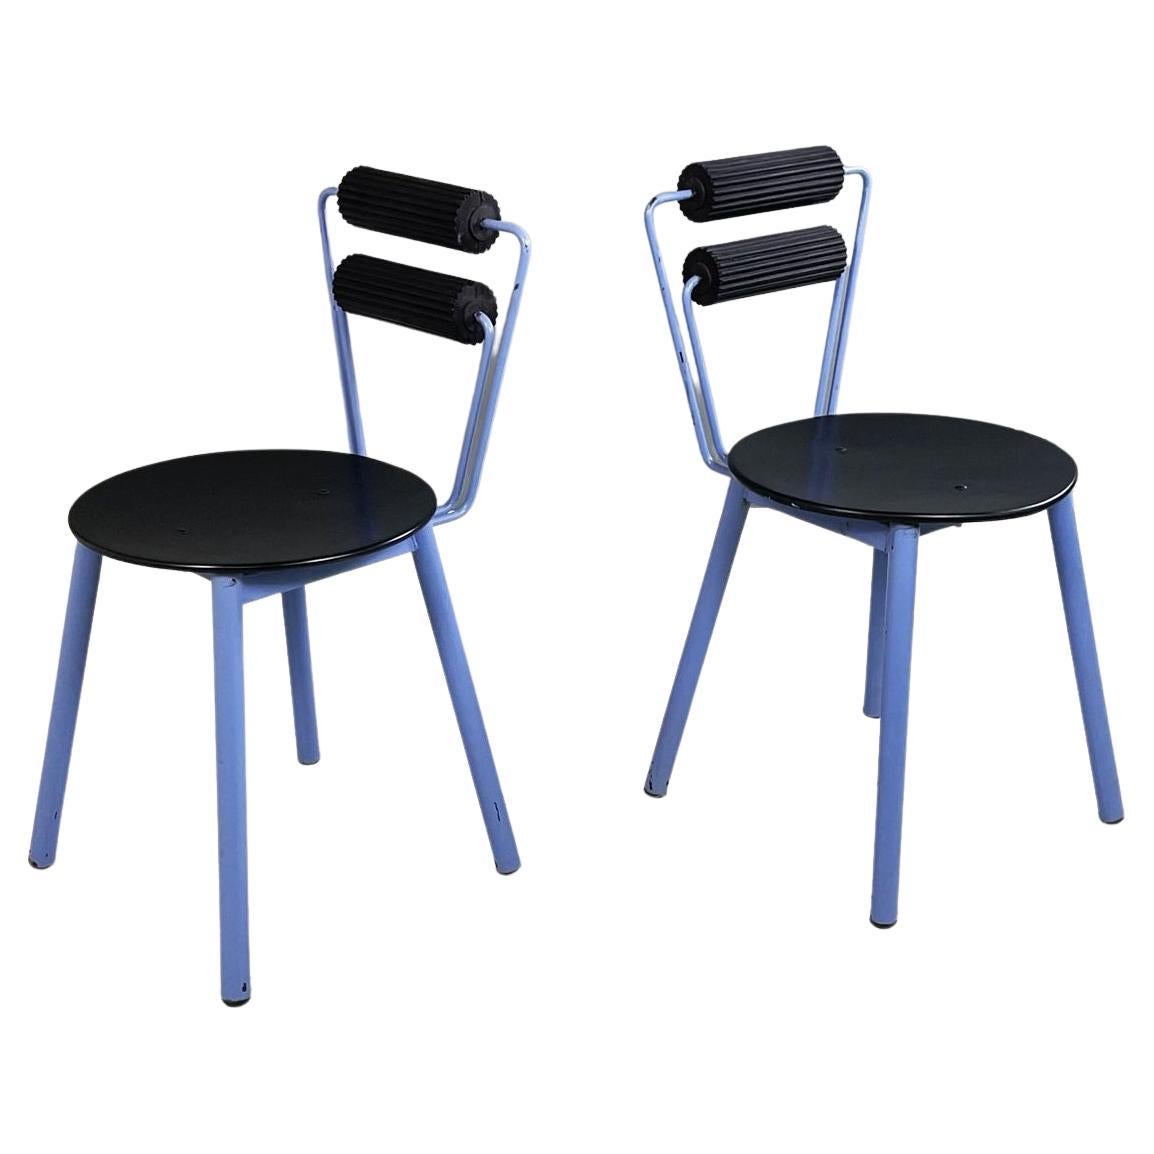 Italian modern Chairs in blue metal, black wood and black rubber, 1980s For Sale